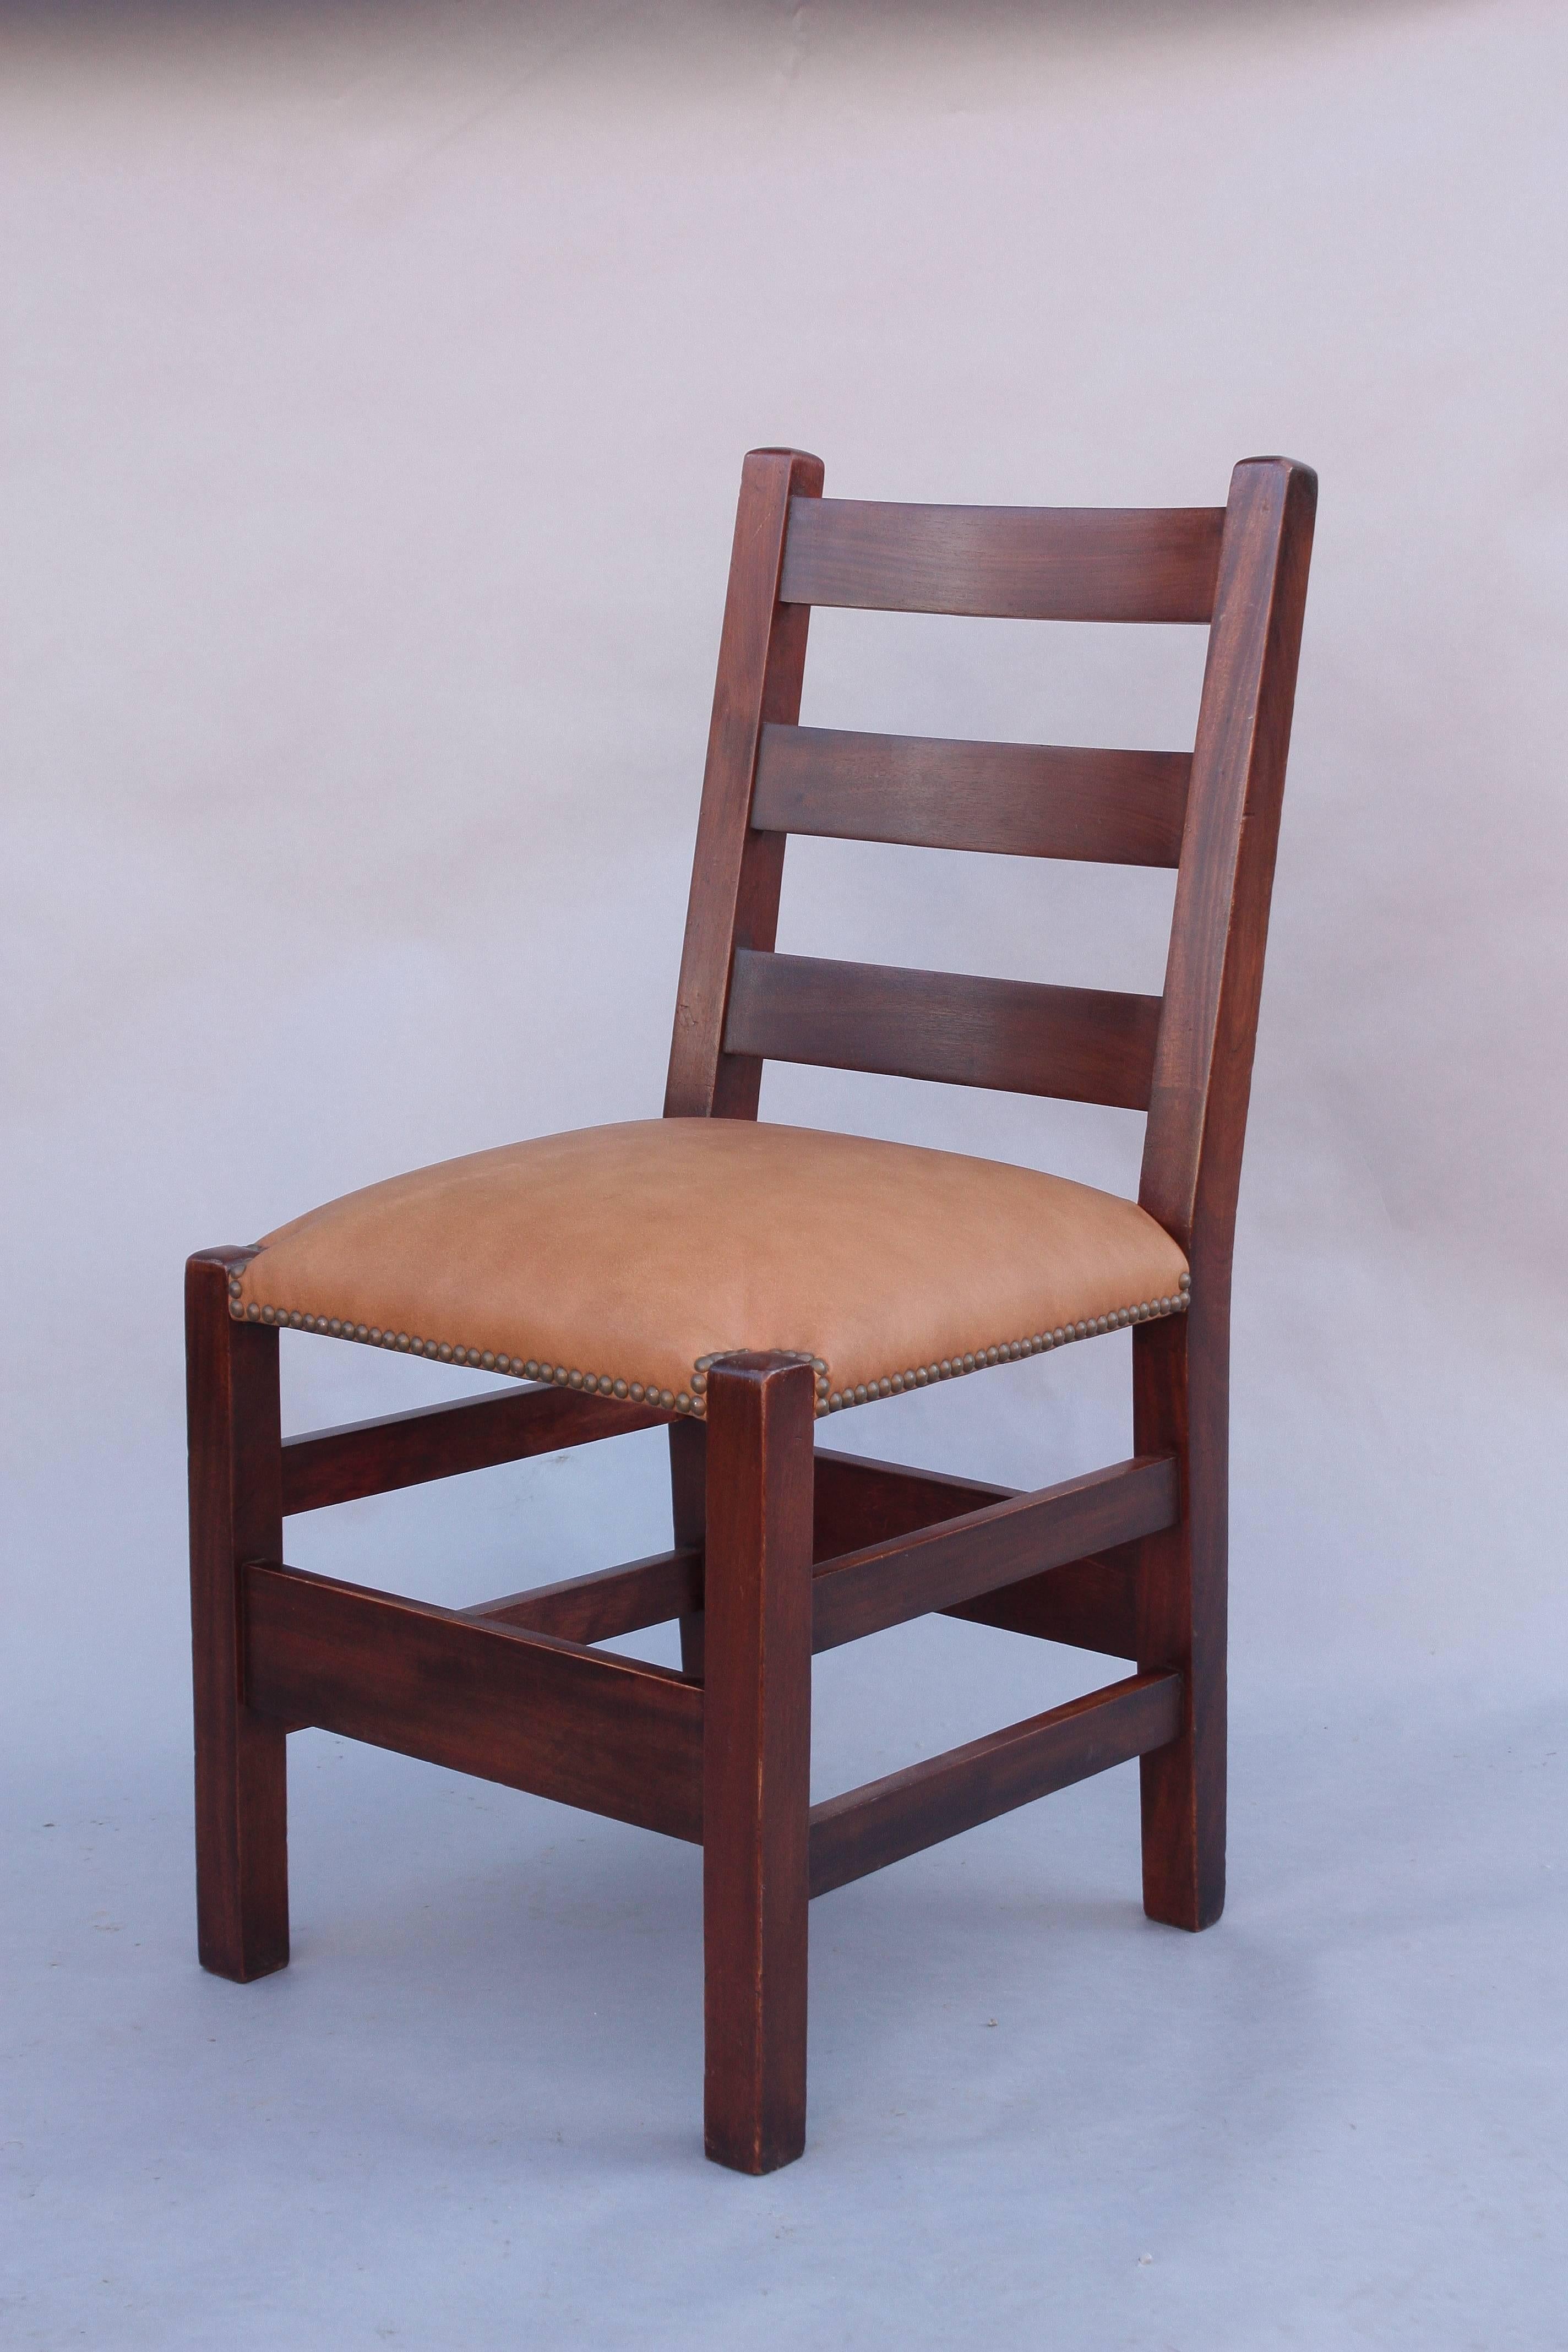 American Arts & Crafts Ladder Back Chair, 1910 For Sale